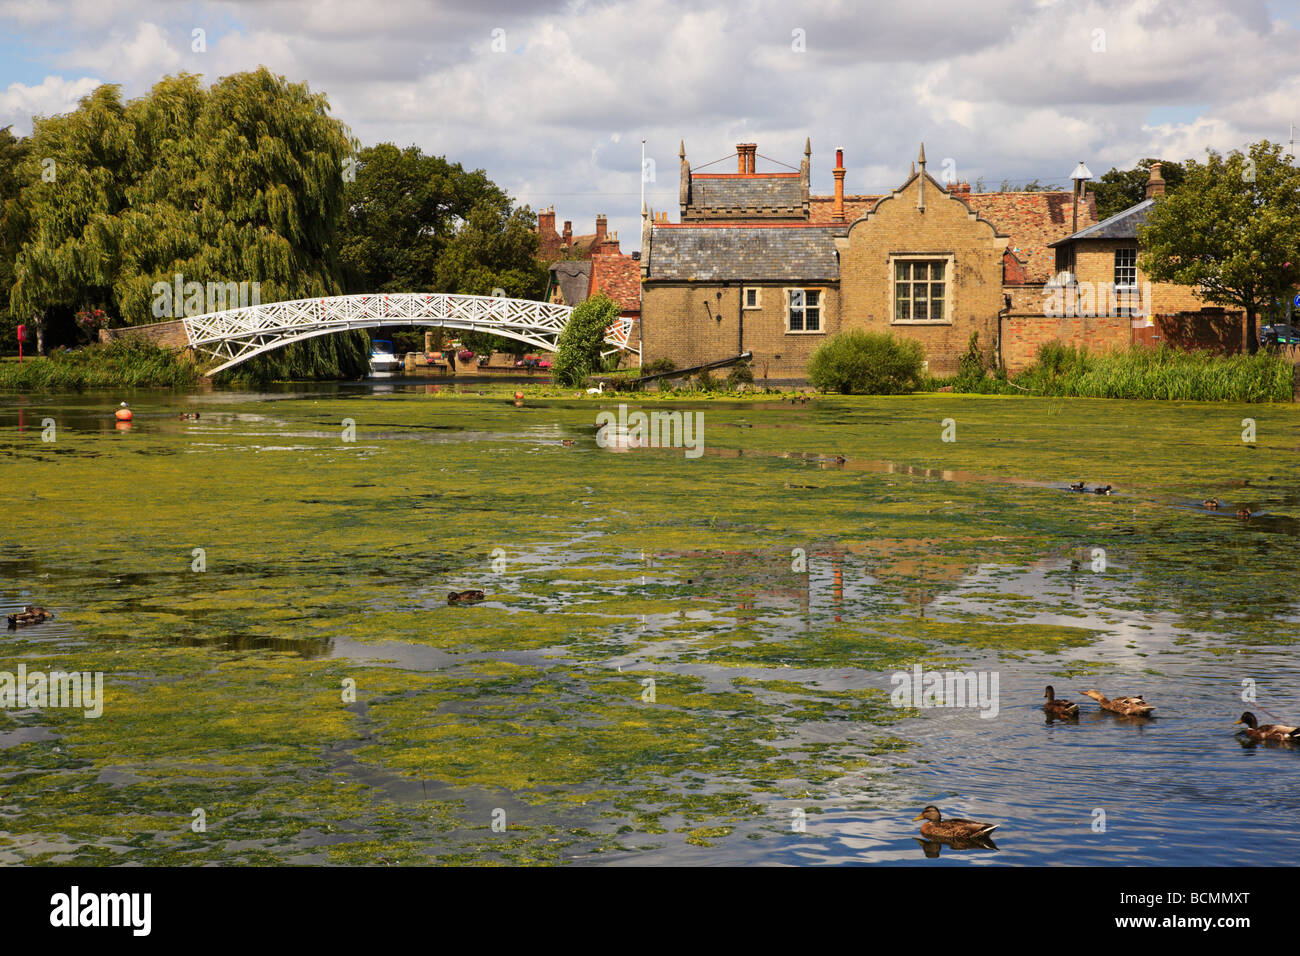 Chinese bridge over the River Great Ouse, Godmanchester Huntingdon Stock Photo